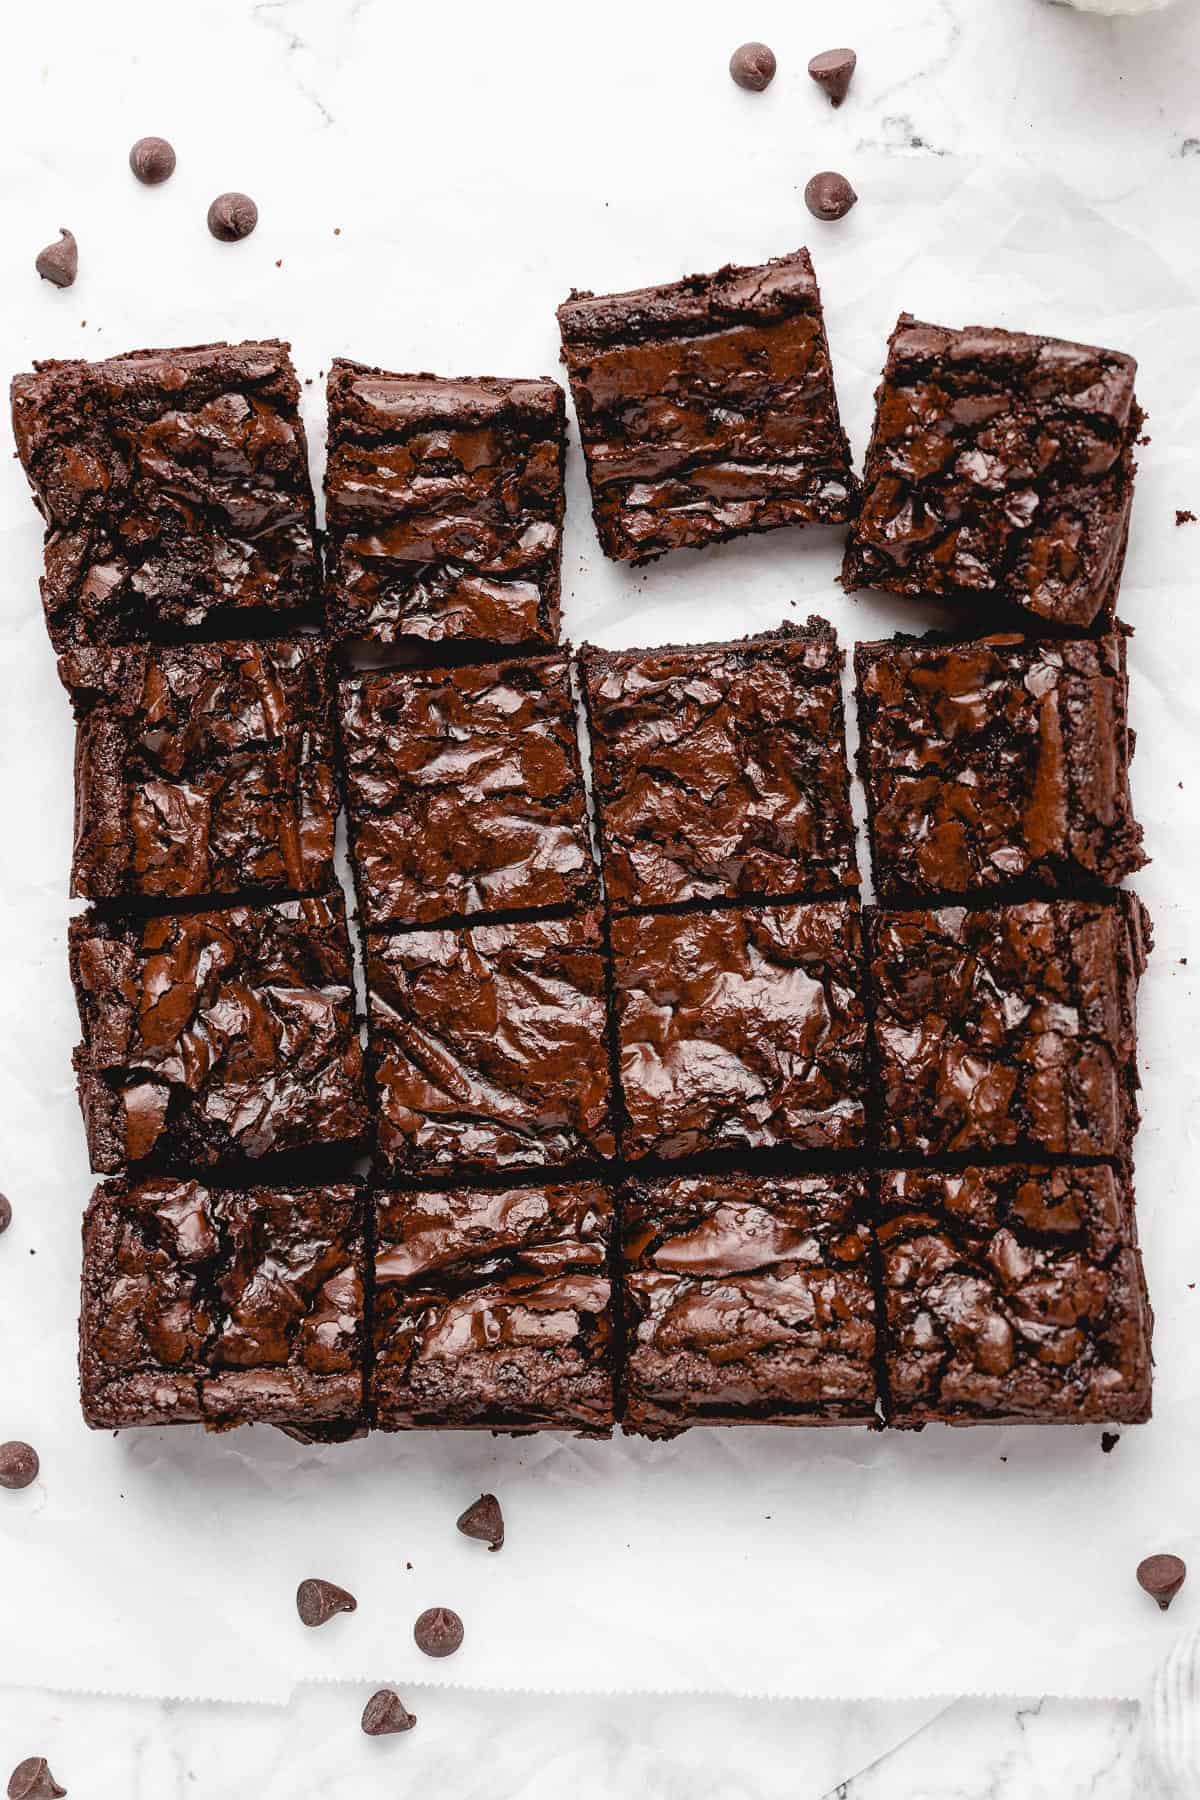 all 16 brownies sliced and a few pulled from the square, top down view